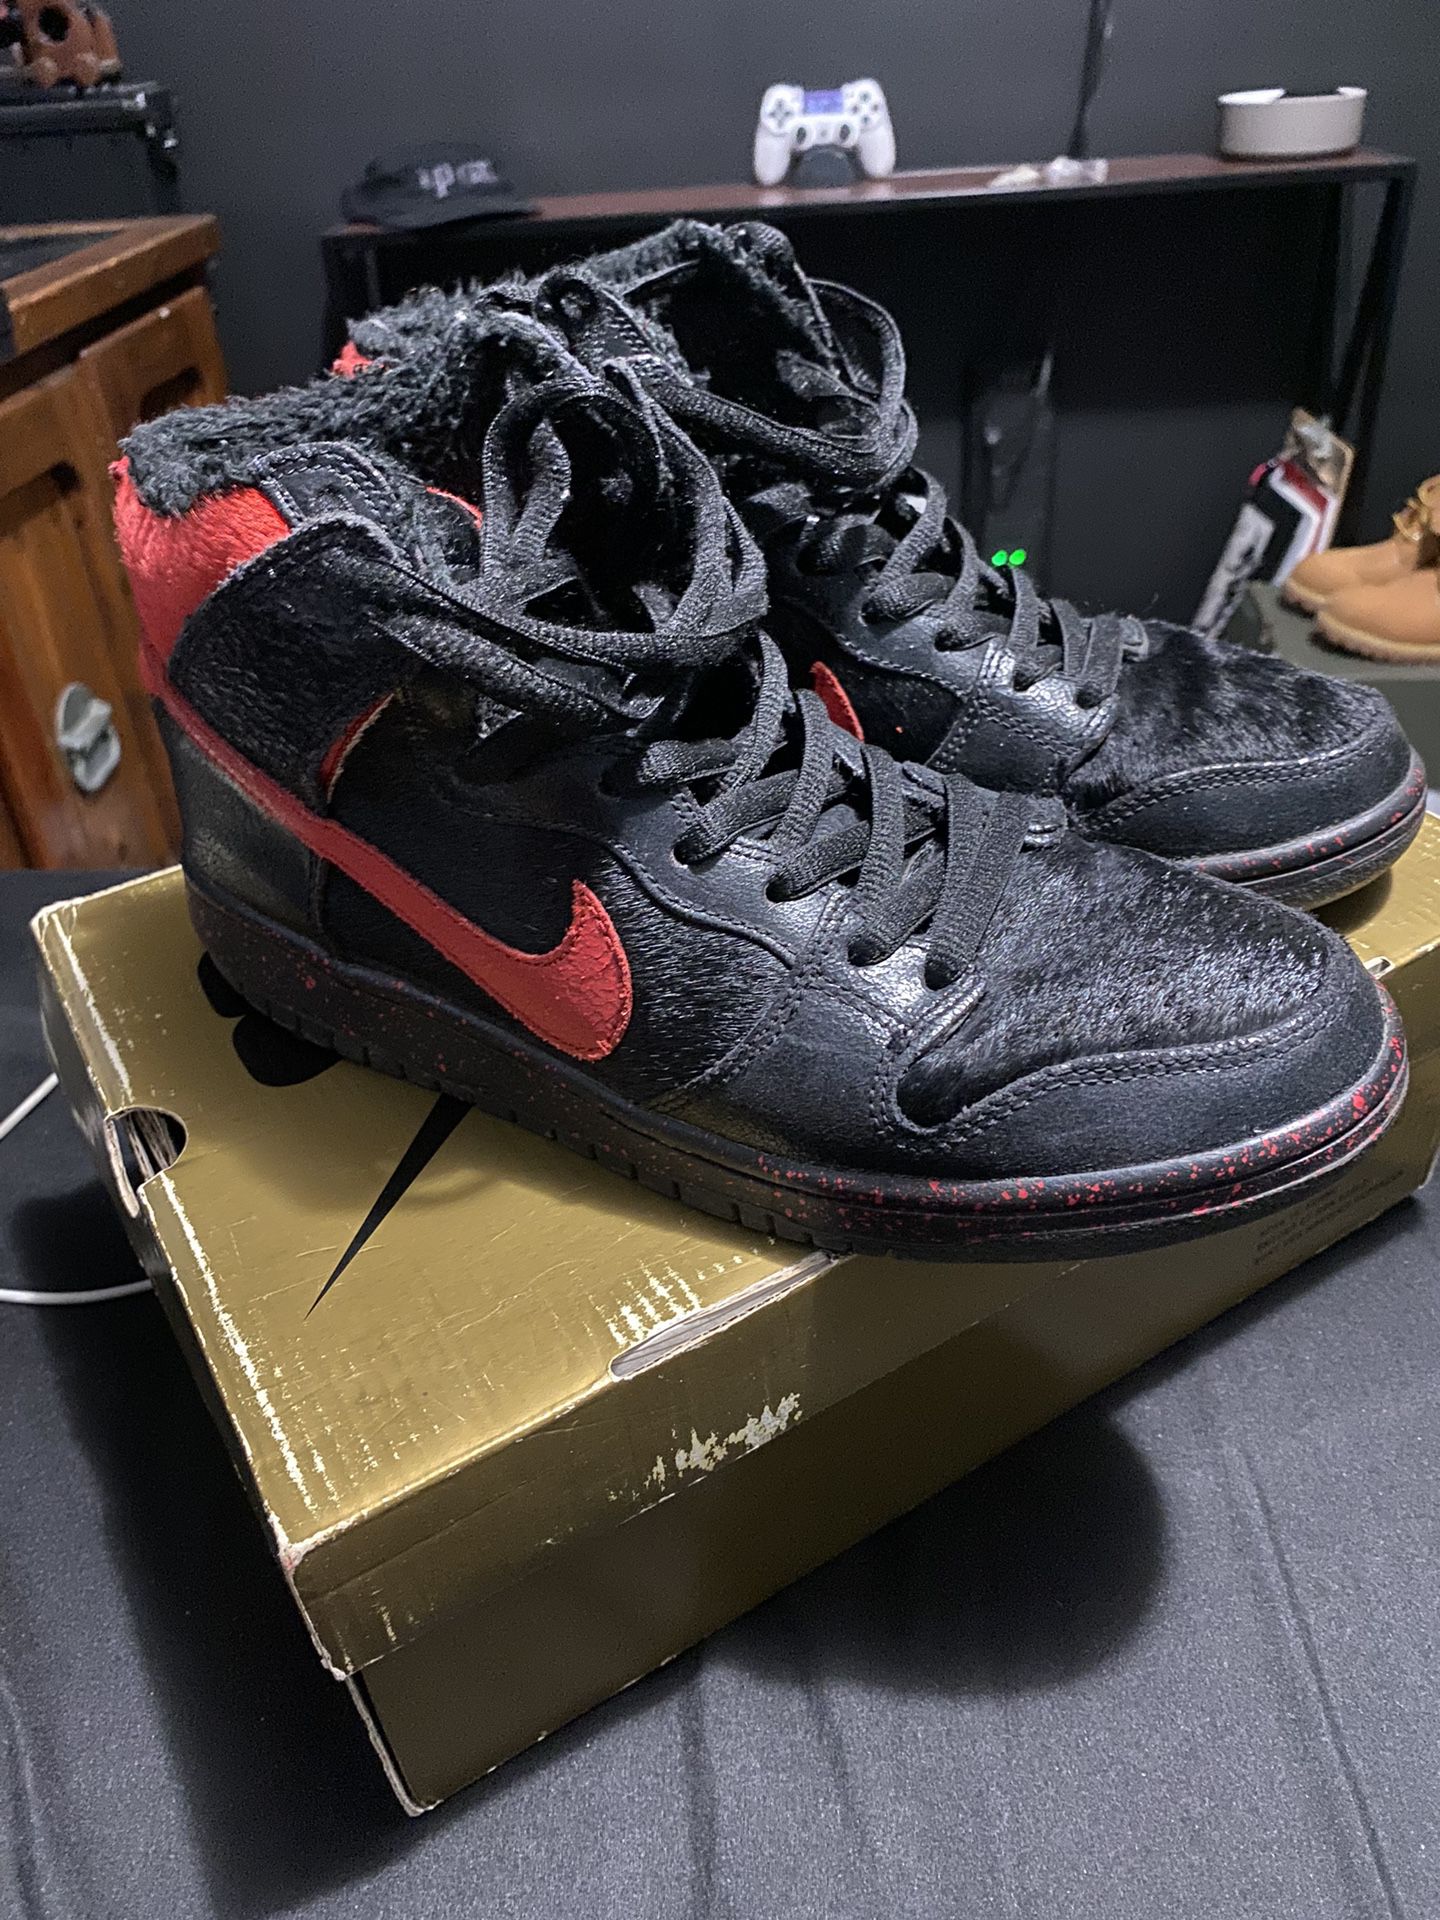 Nike SB Size 10 for Chicago, IL - OfferUp